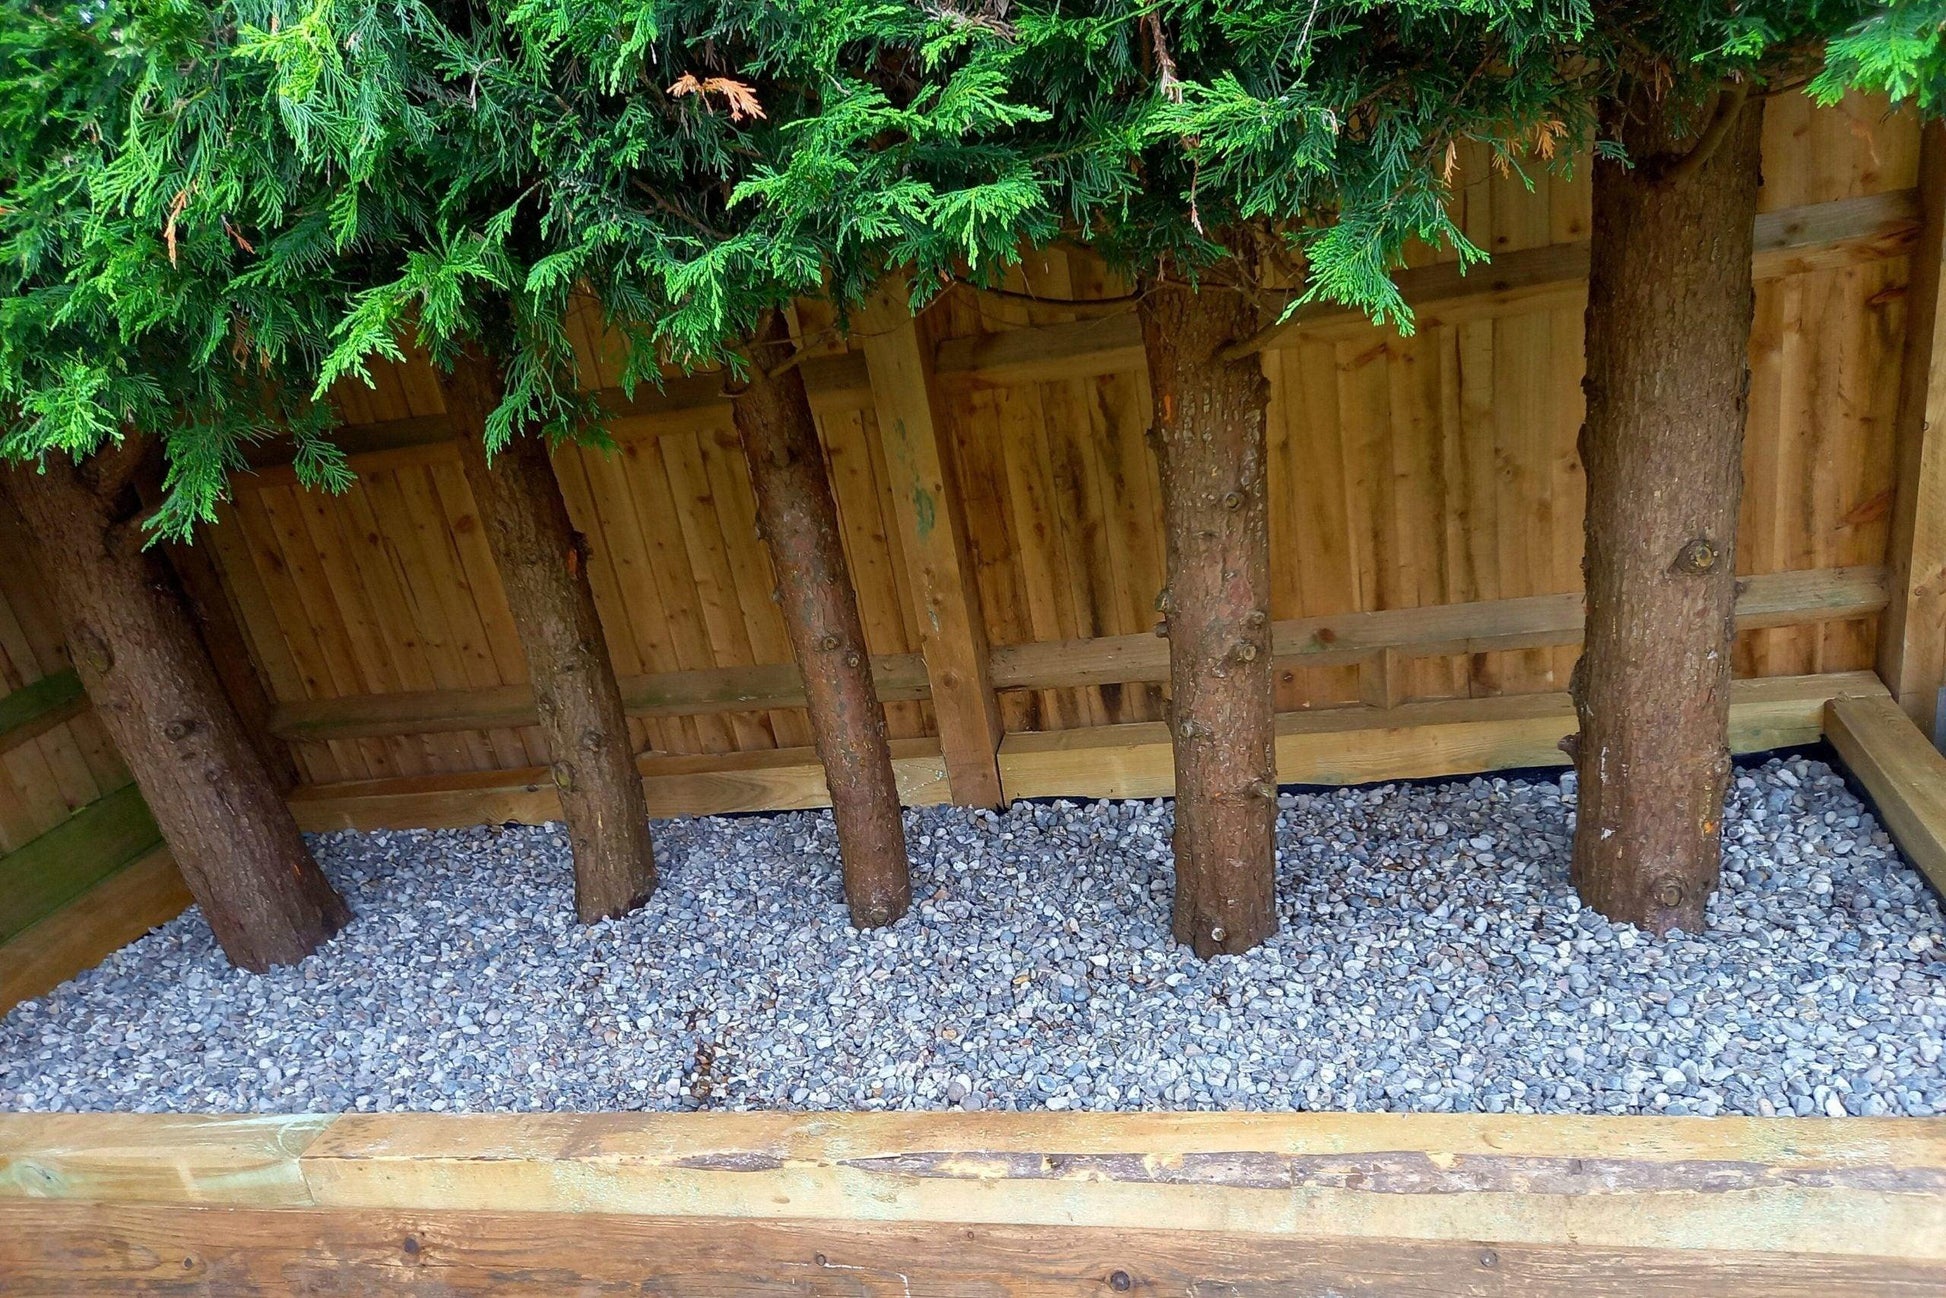 a row of trees in a wooden fenced area